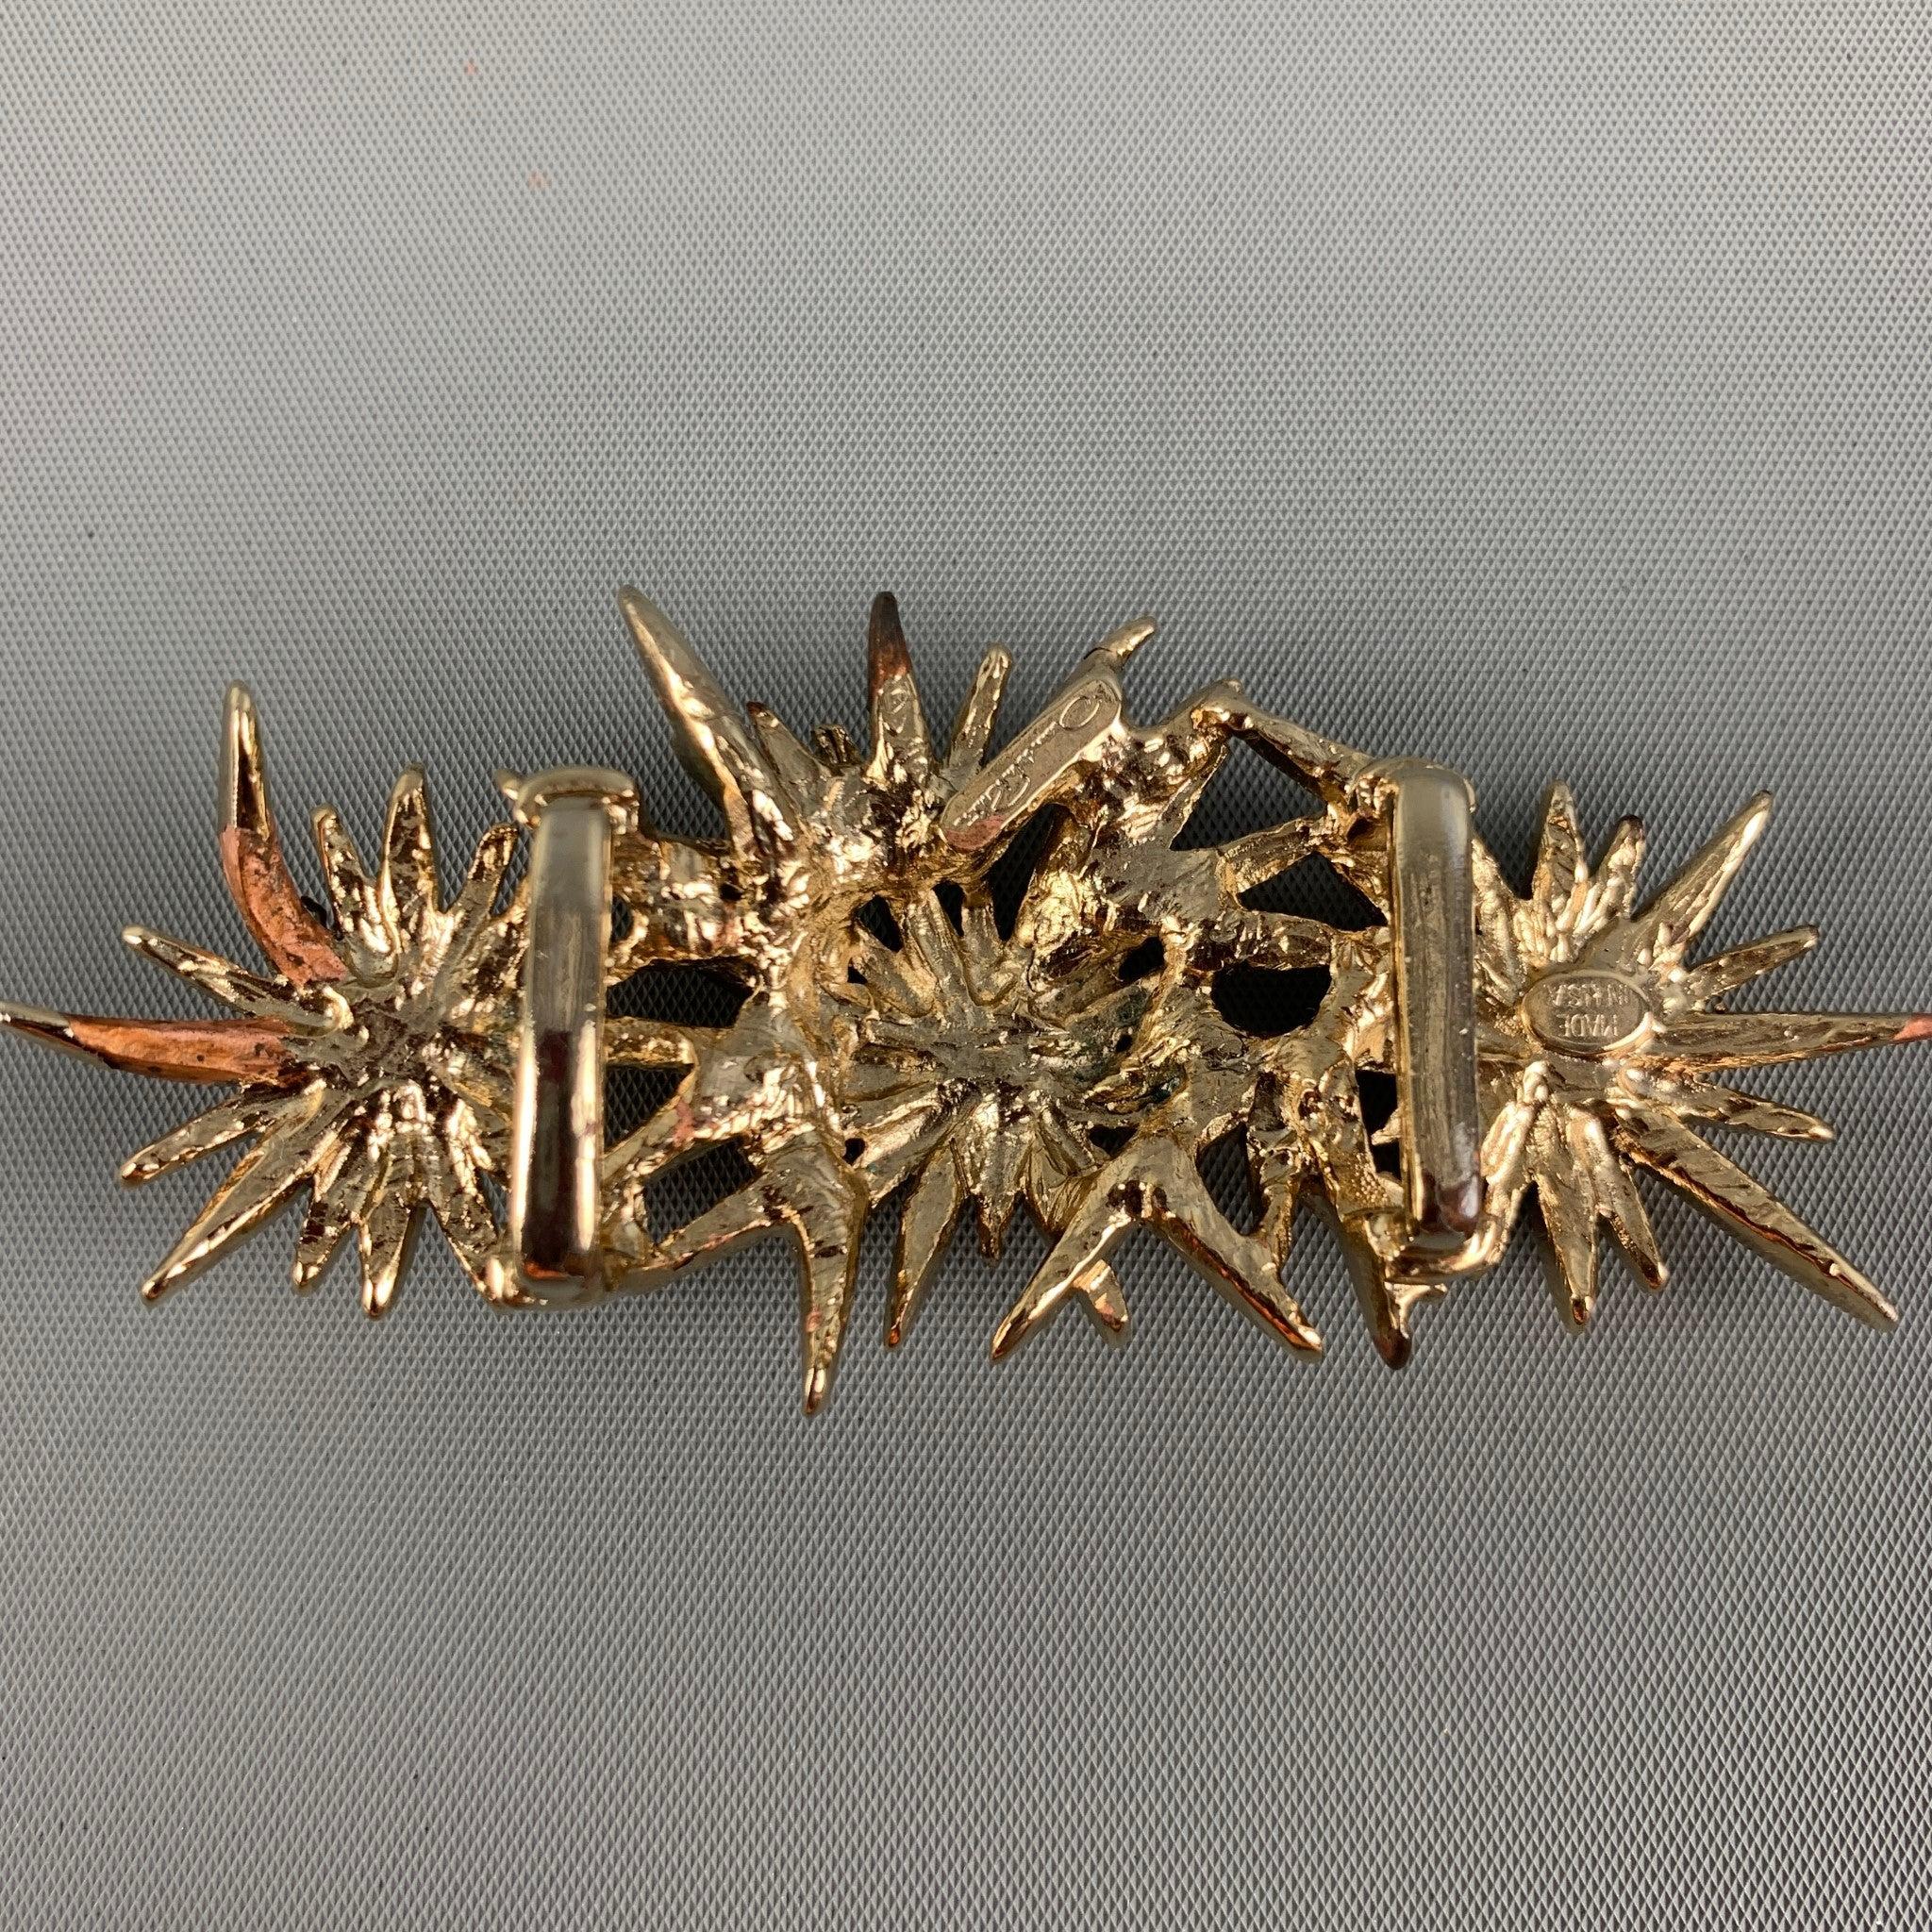 OSCAR DE LA RENTA belt buckle comes in a gold tone metal featuring a floral design, red & pink rhinestones, and a belt loop. Made in USA.
Excellent
Pre-Owned Condition. 

Measurements: 
  9 cm. x 4 cm.
  
  
 
Reference: 123690
Category: Belt
More